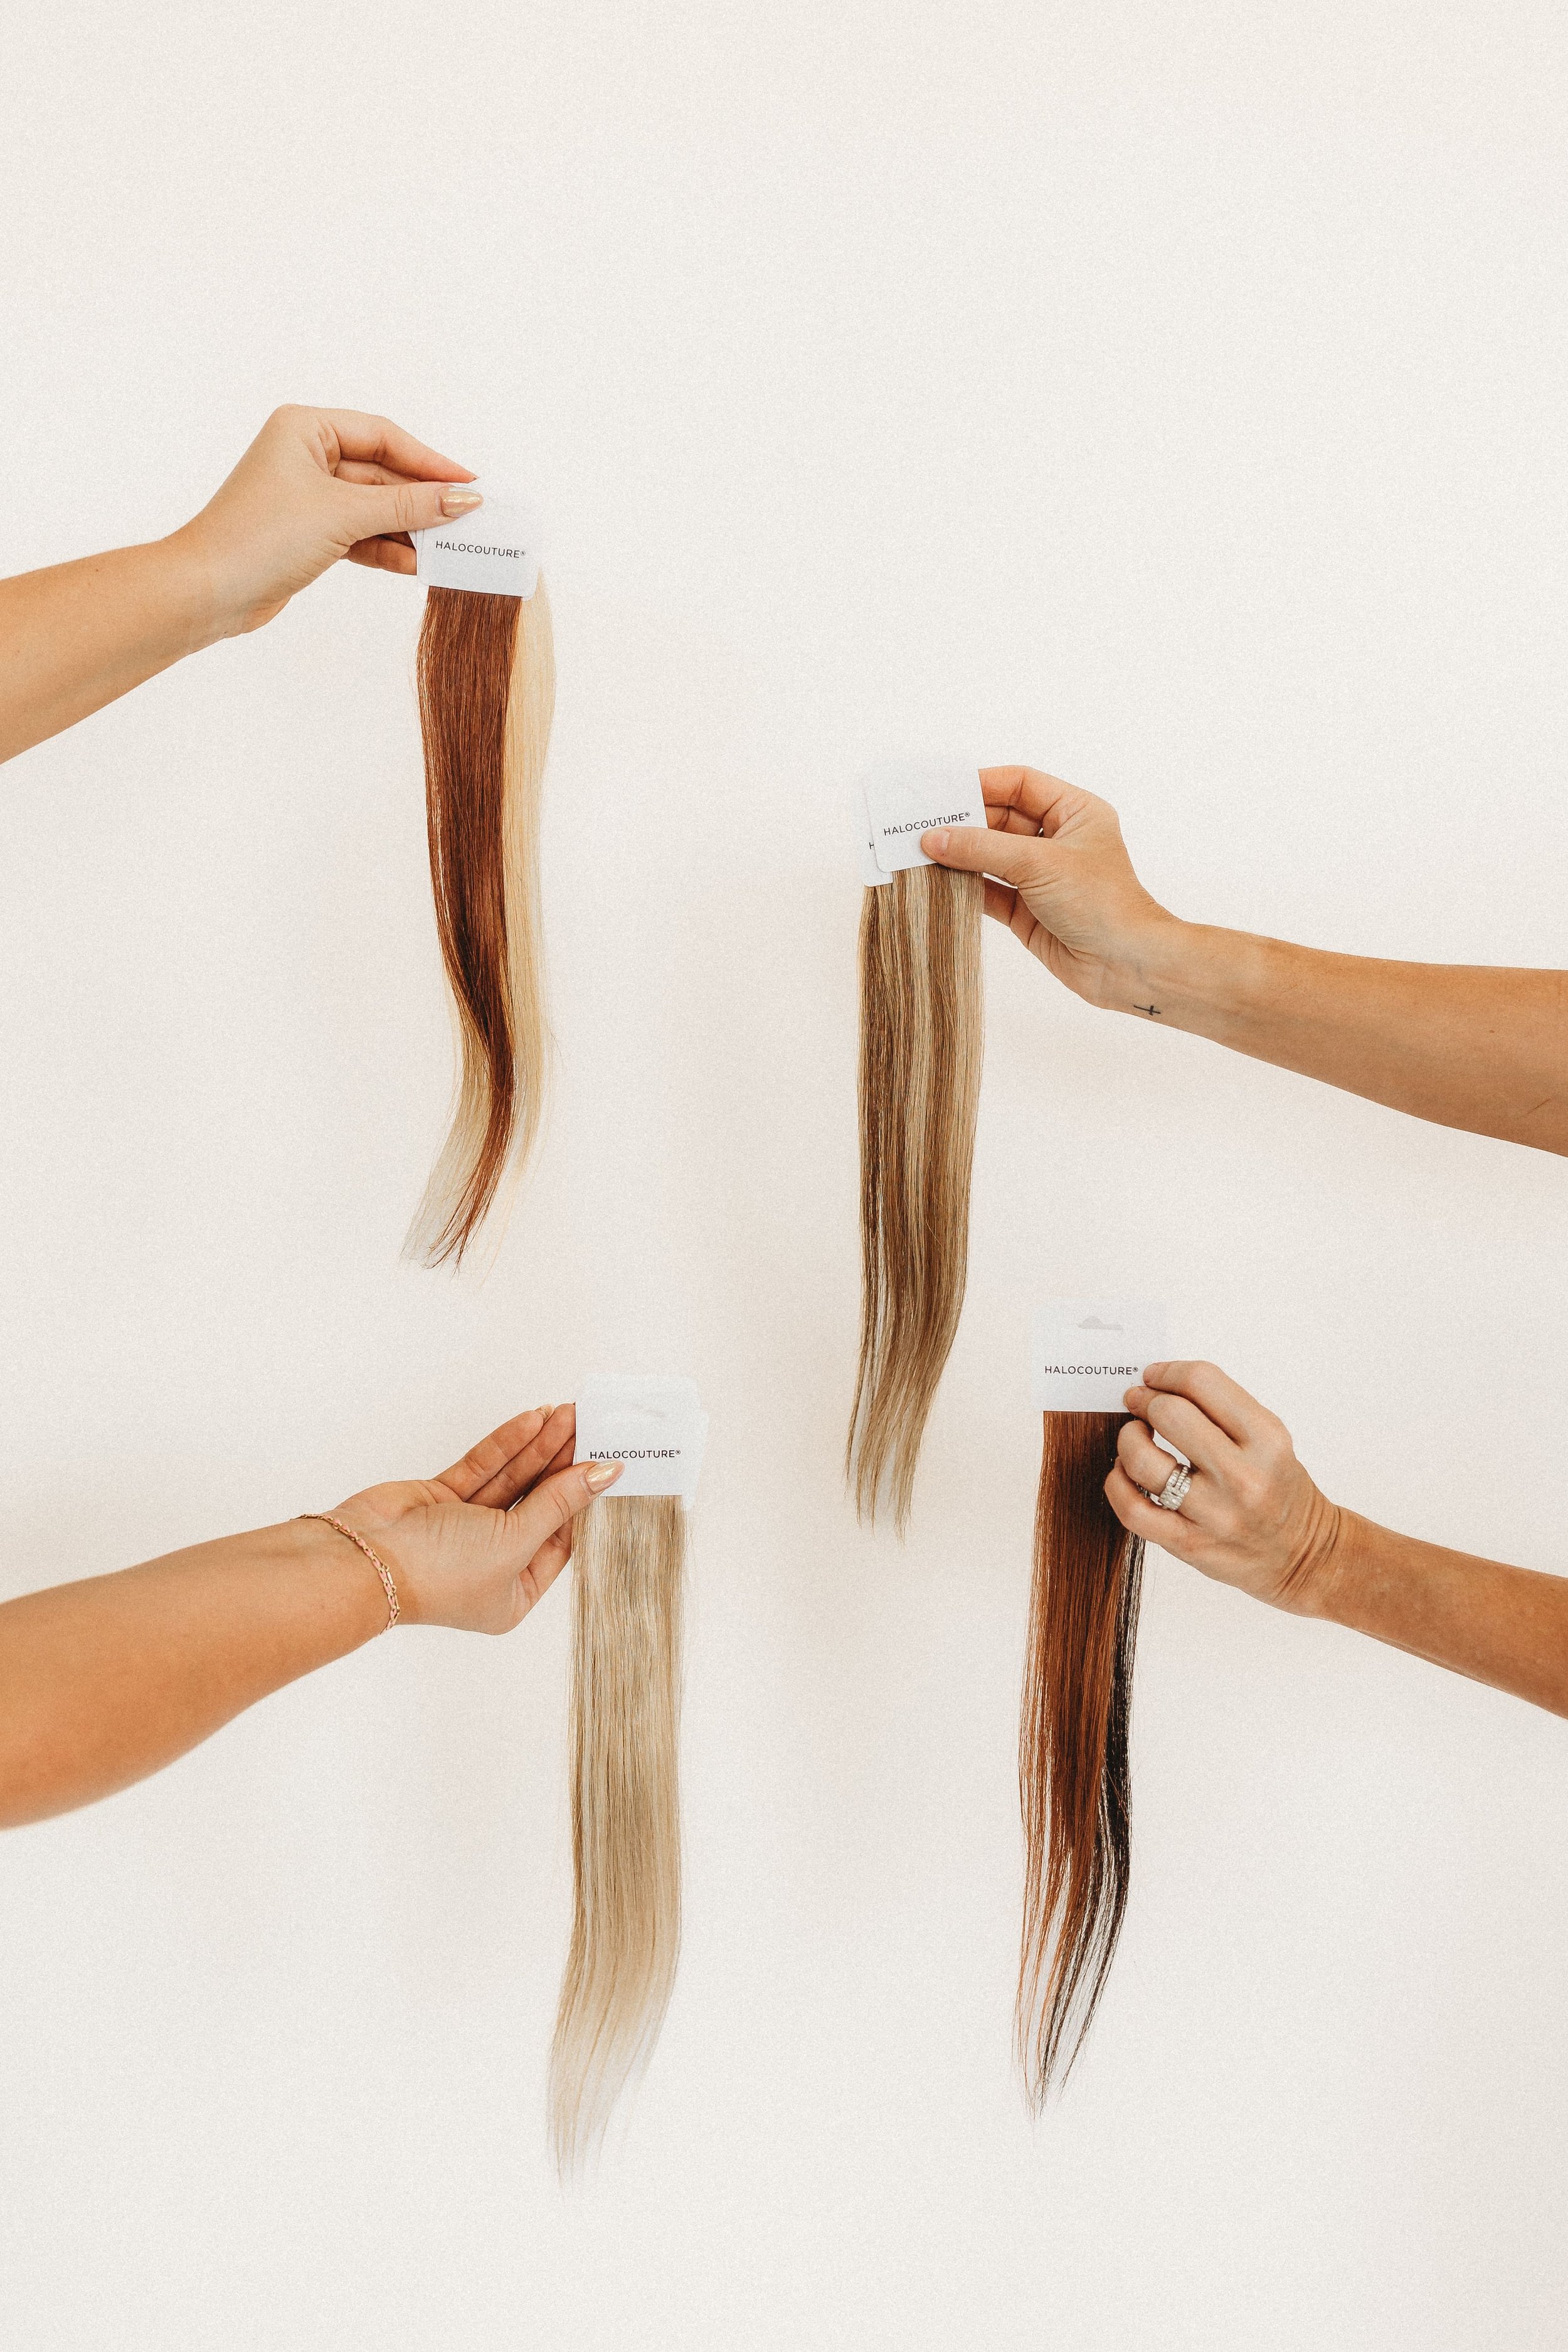  four hands hold up samples for hair extensions 